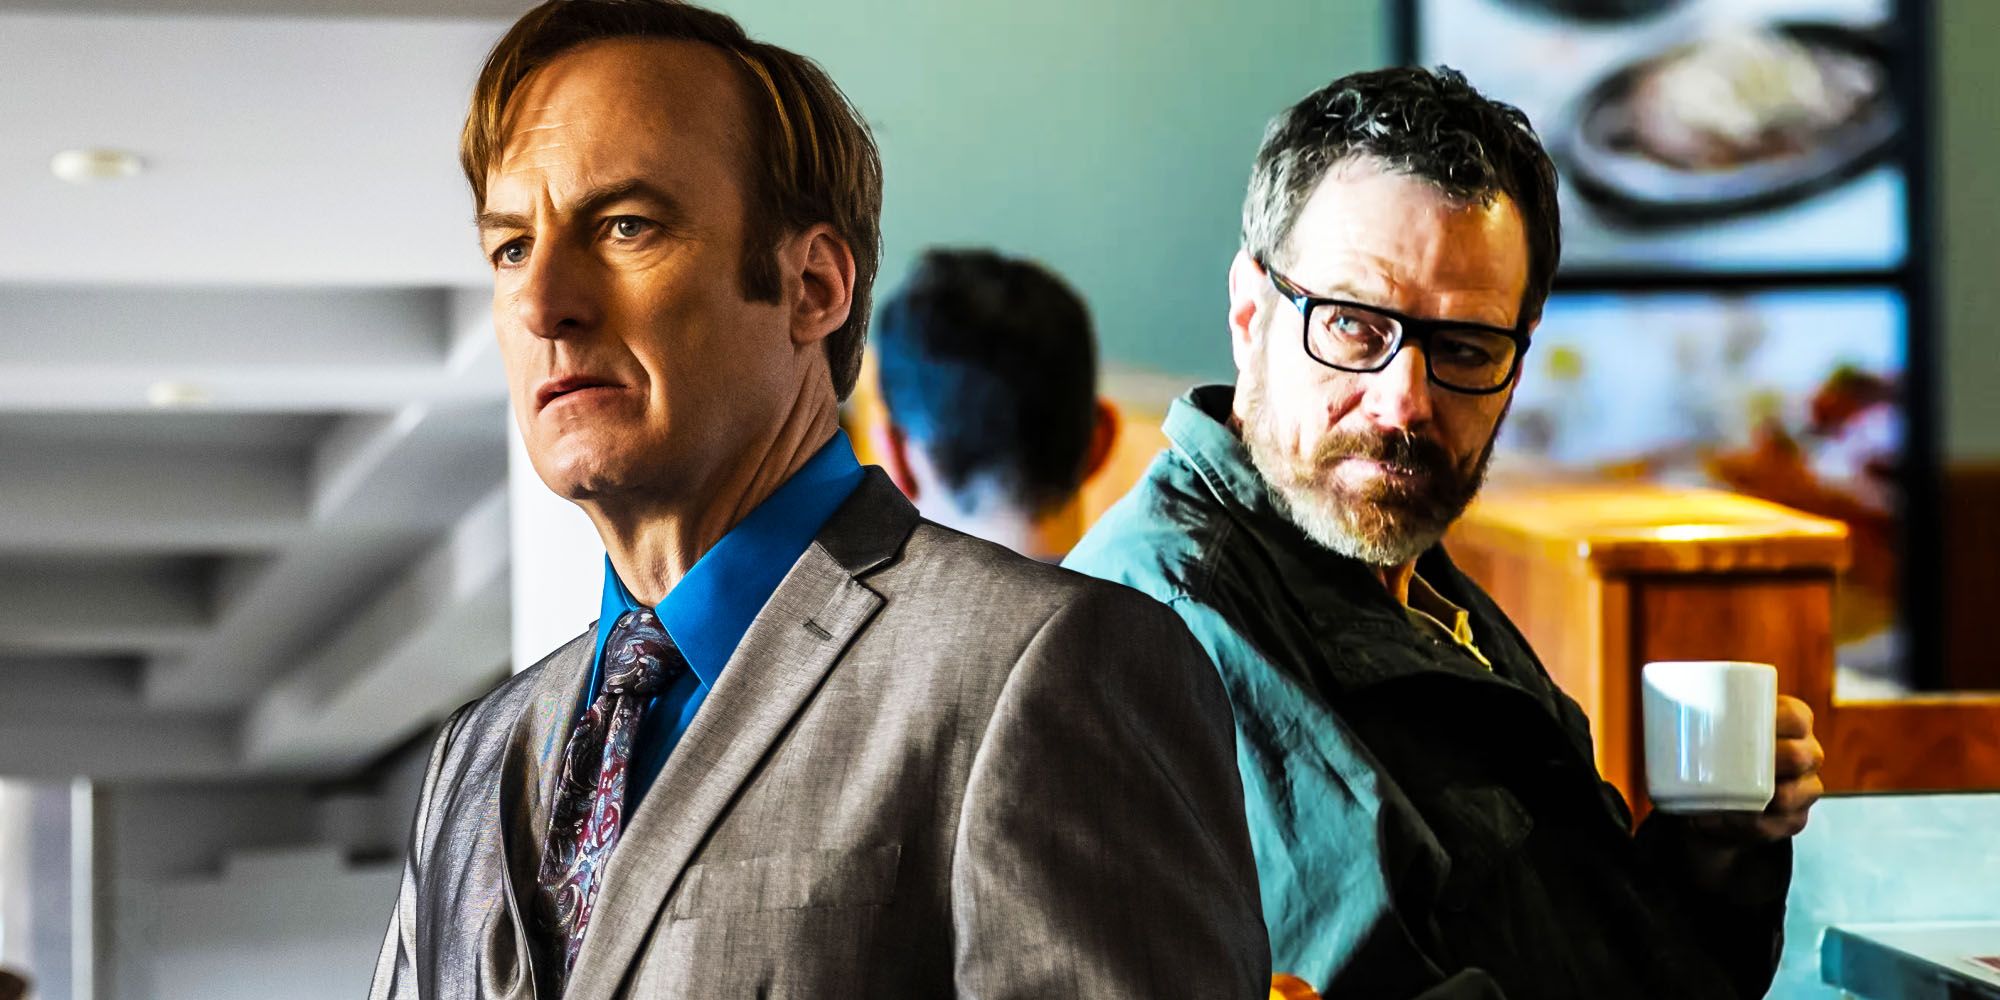 A collage of Walter White and Saul Goodman